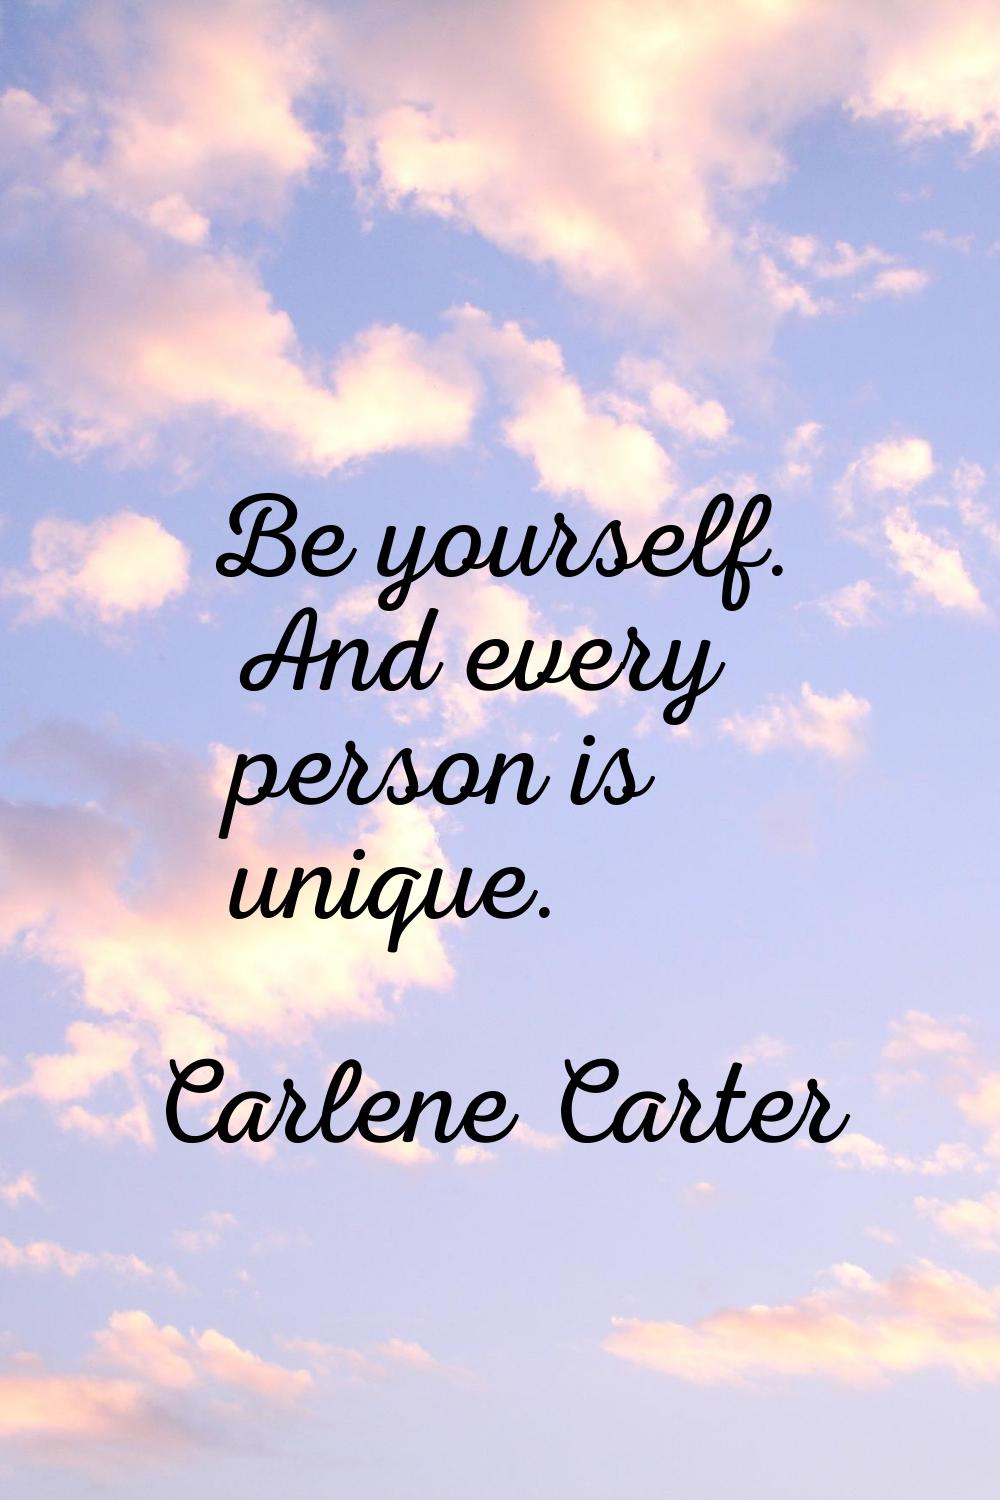 Be yourself. And every person is unique.